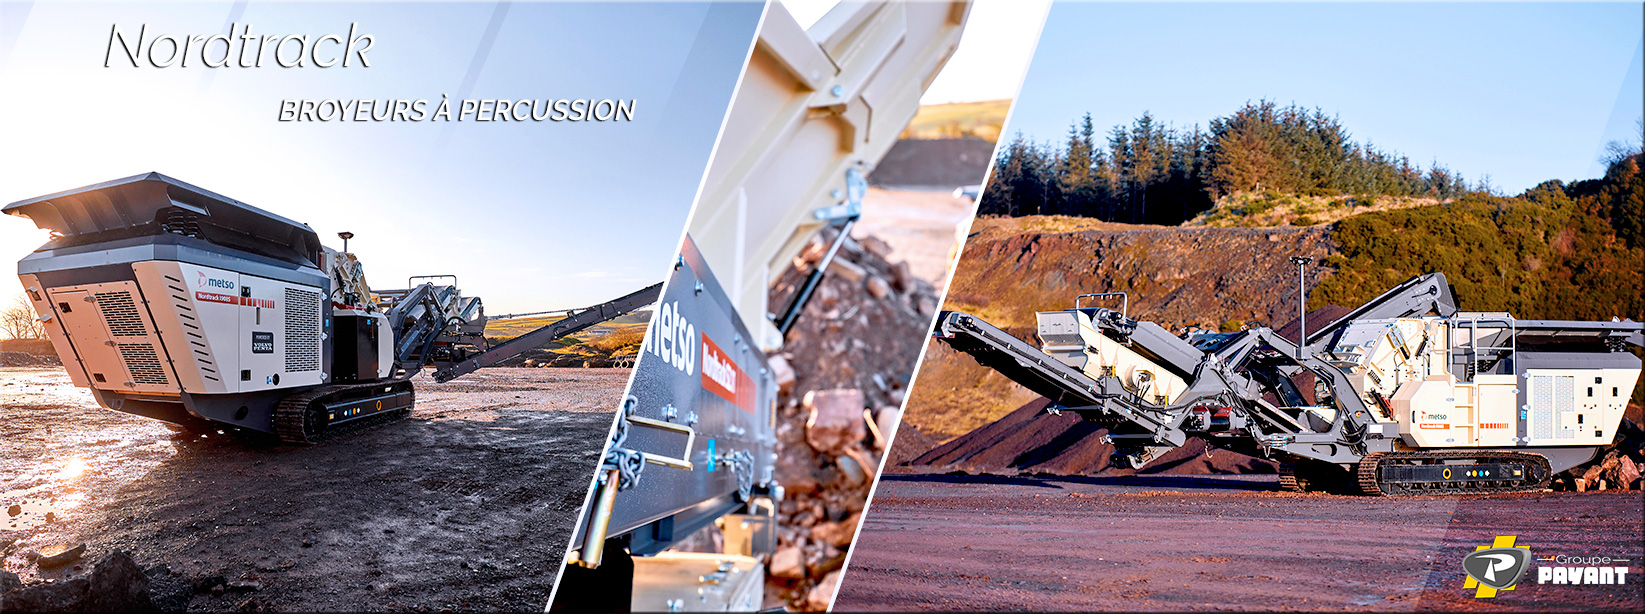 Nordtrack Broyeur à percussion Metso Outotec